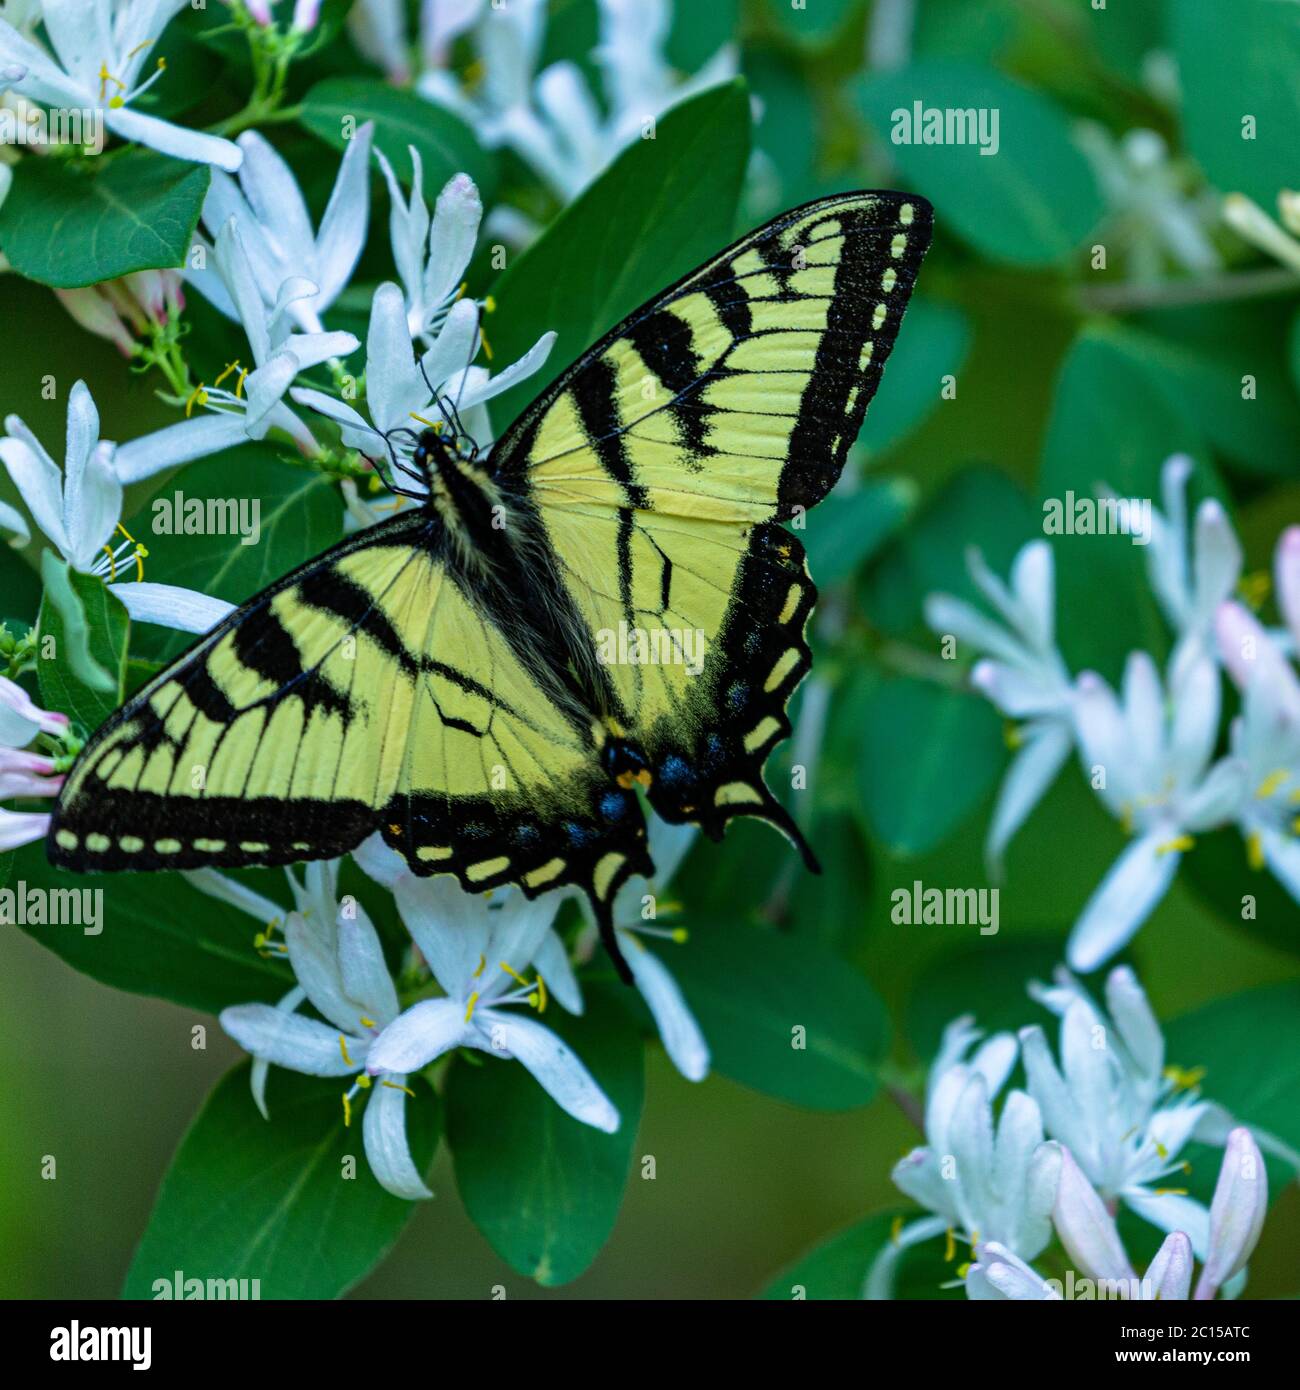 Swallowtail butterfly perched on blooming honeysuckle tree. Stock Photo